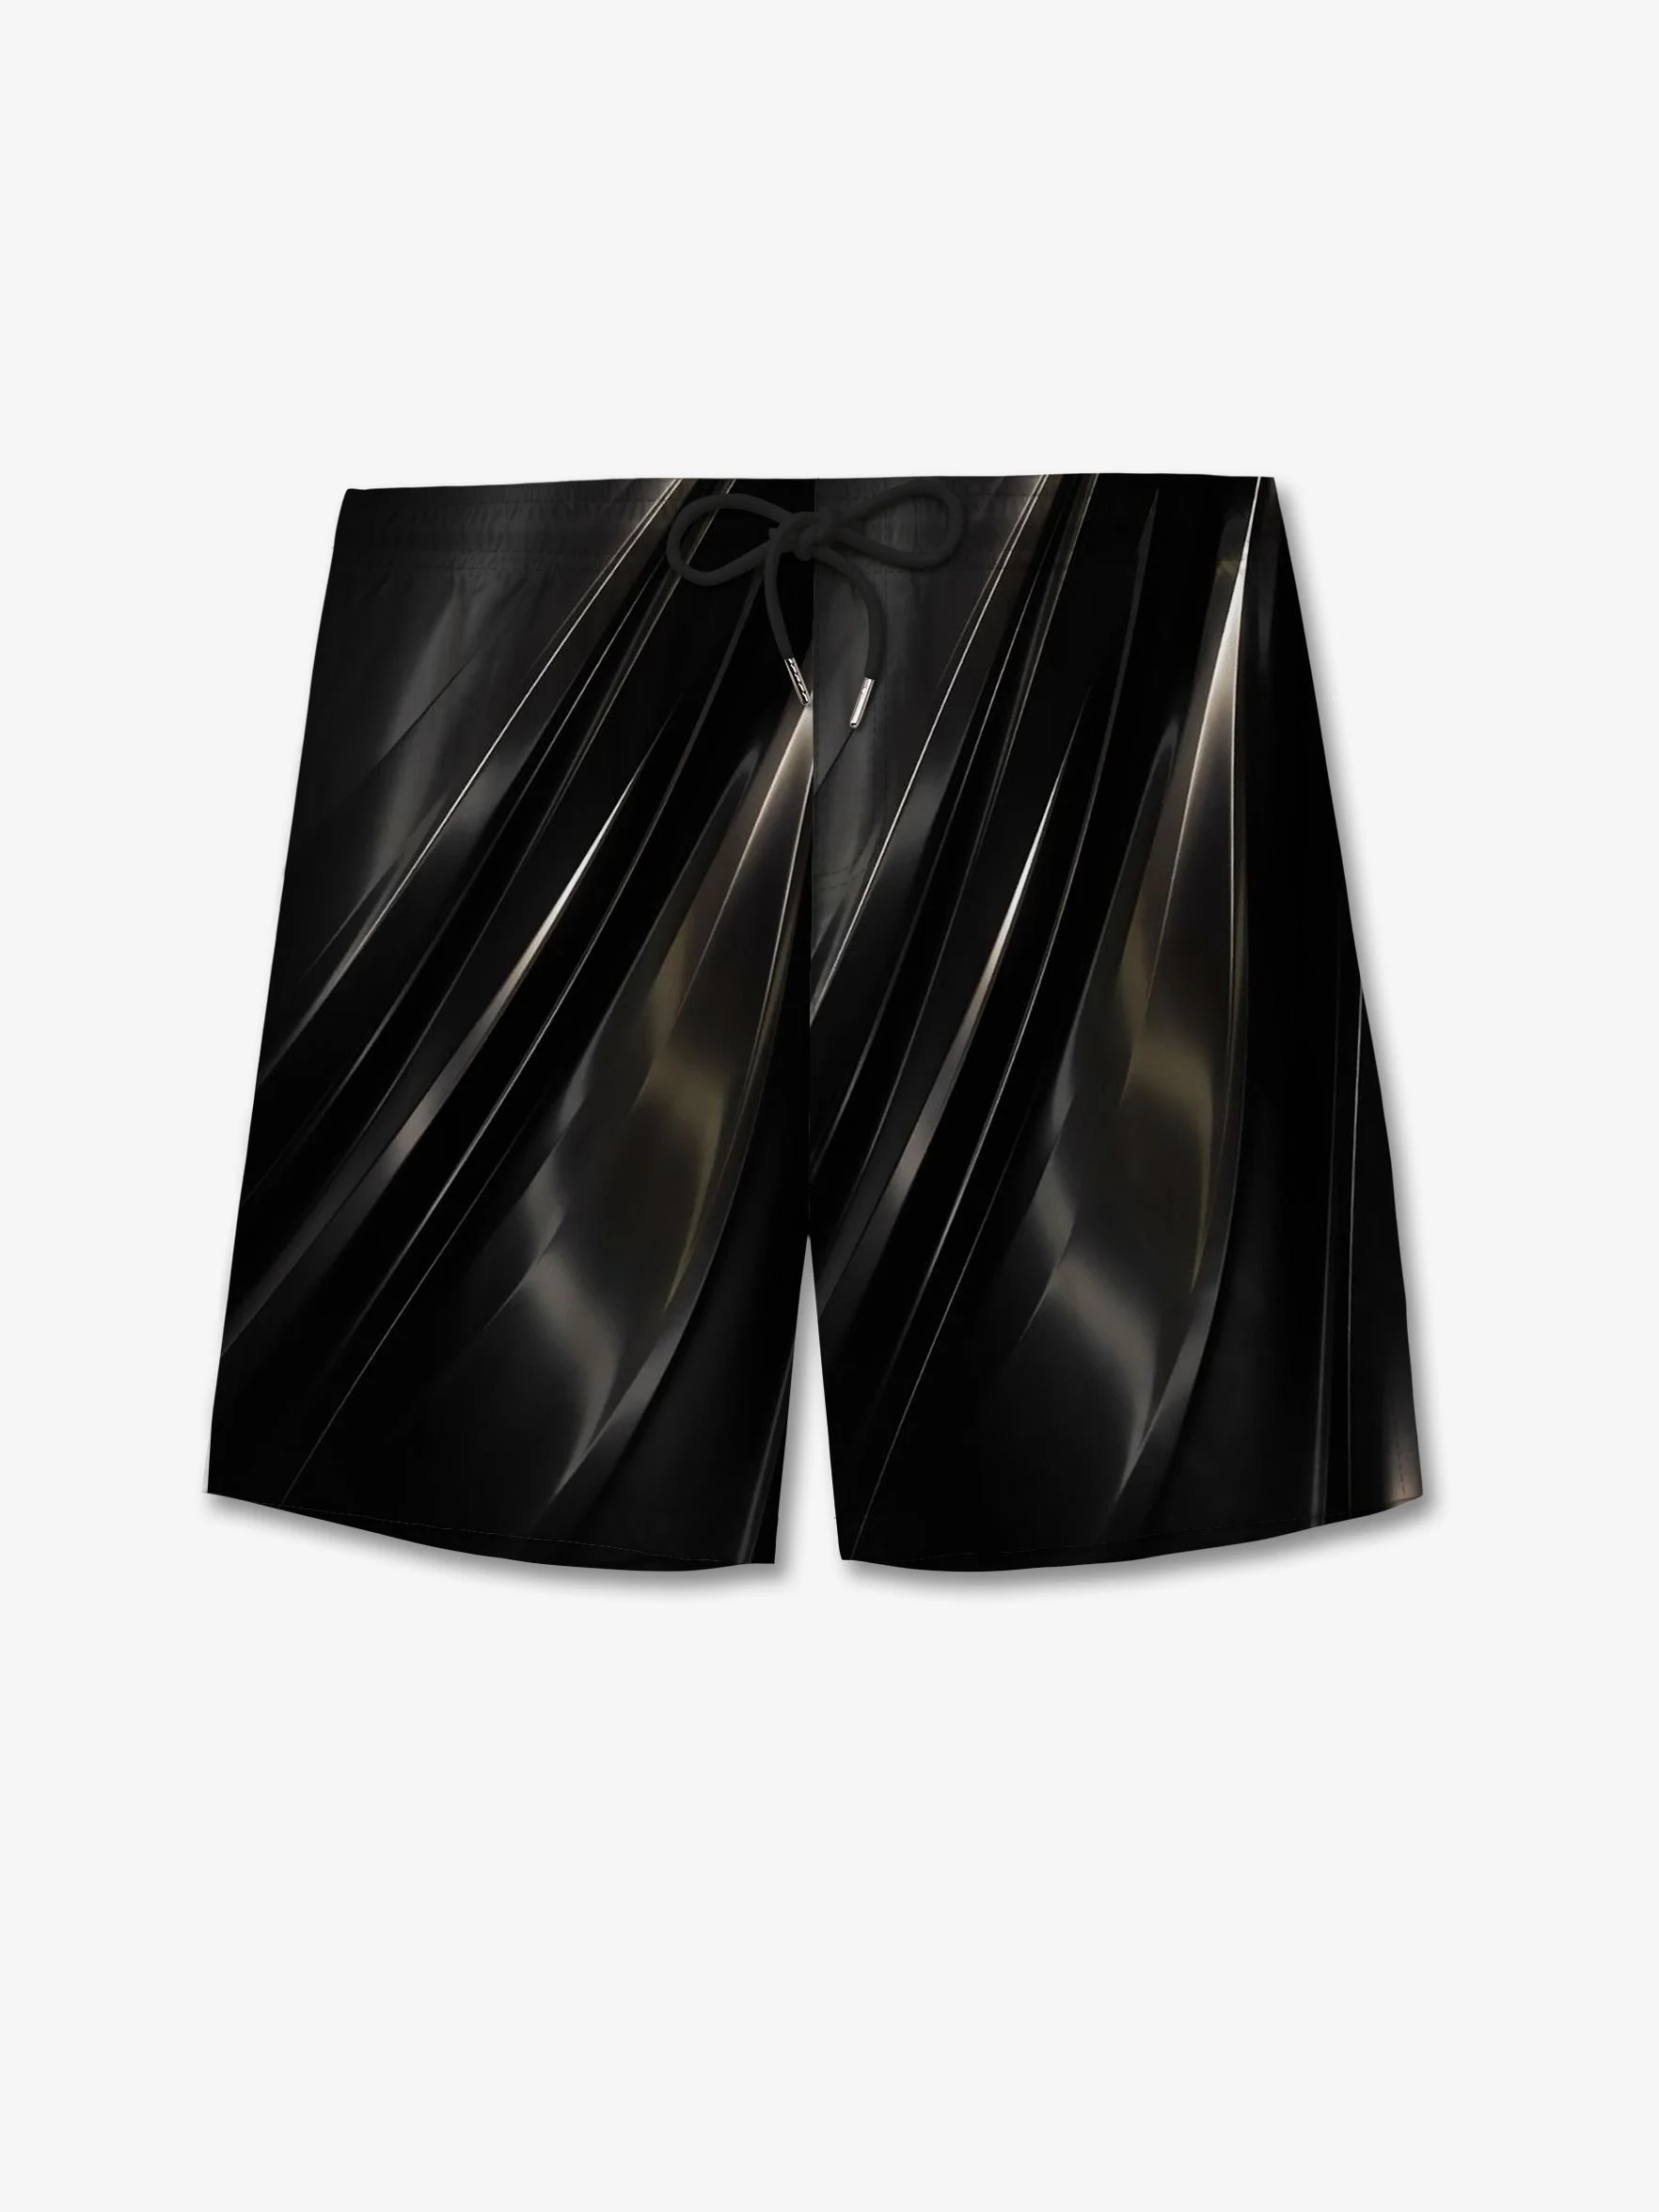 Quick Dry Mesh Lining Abstract 19" Boardshorts